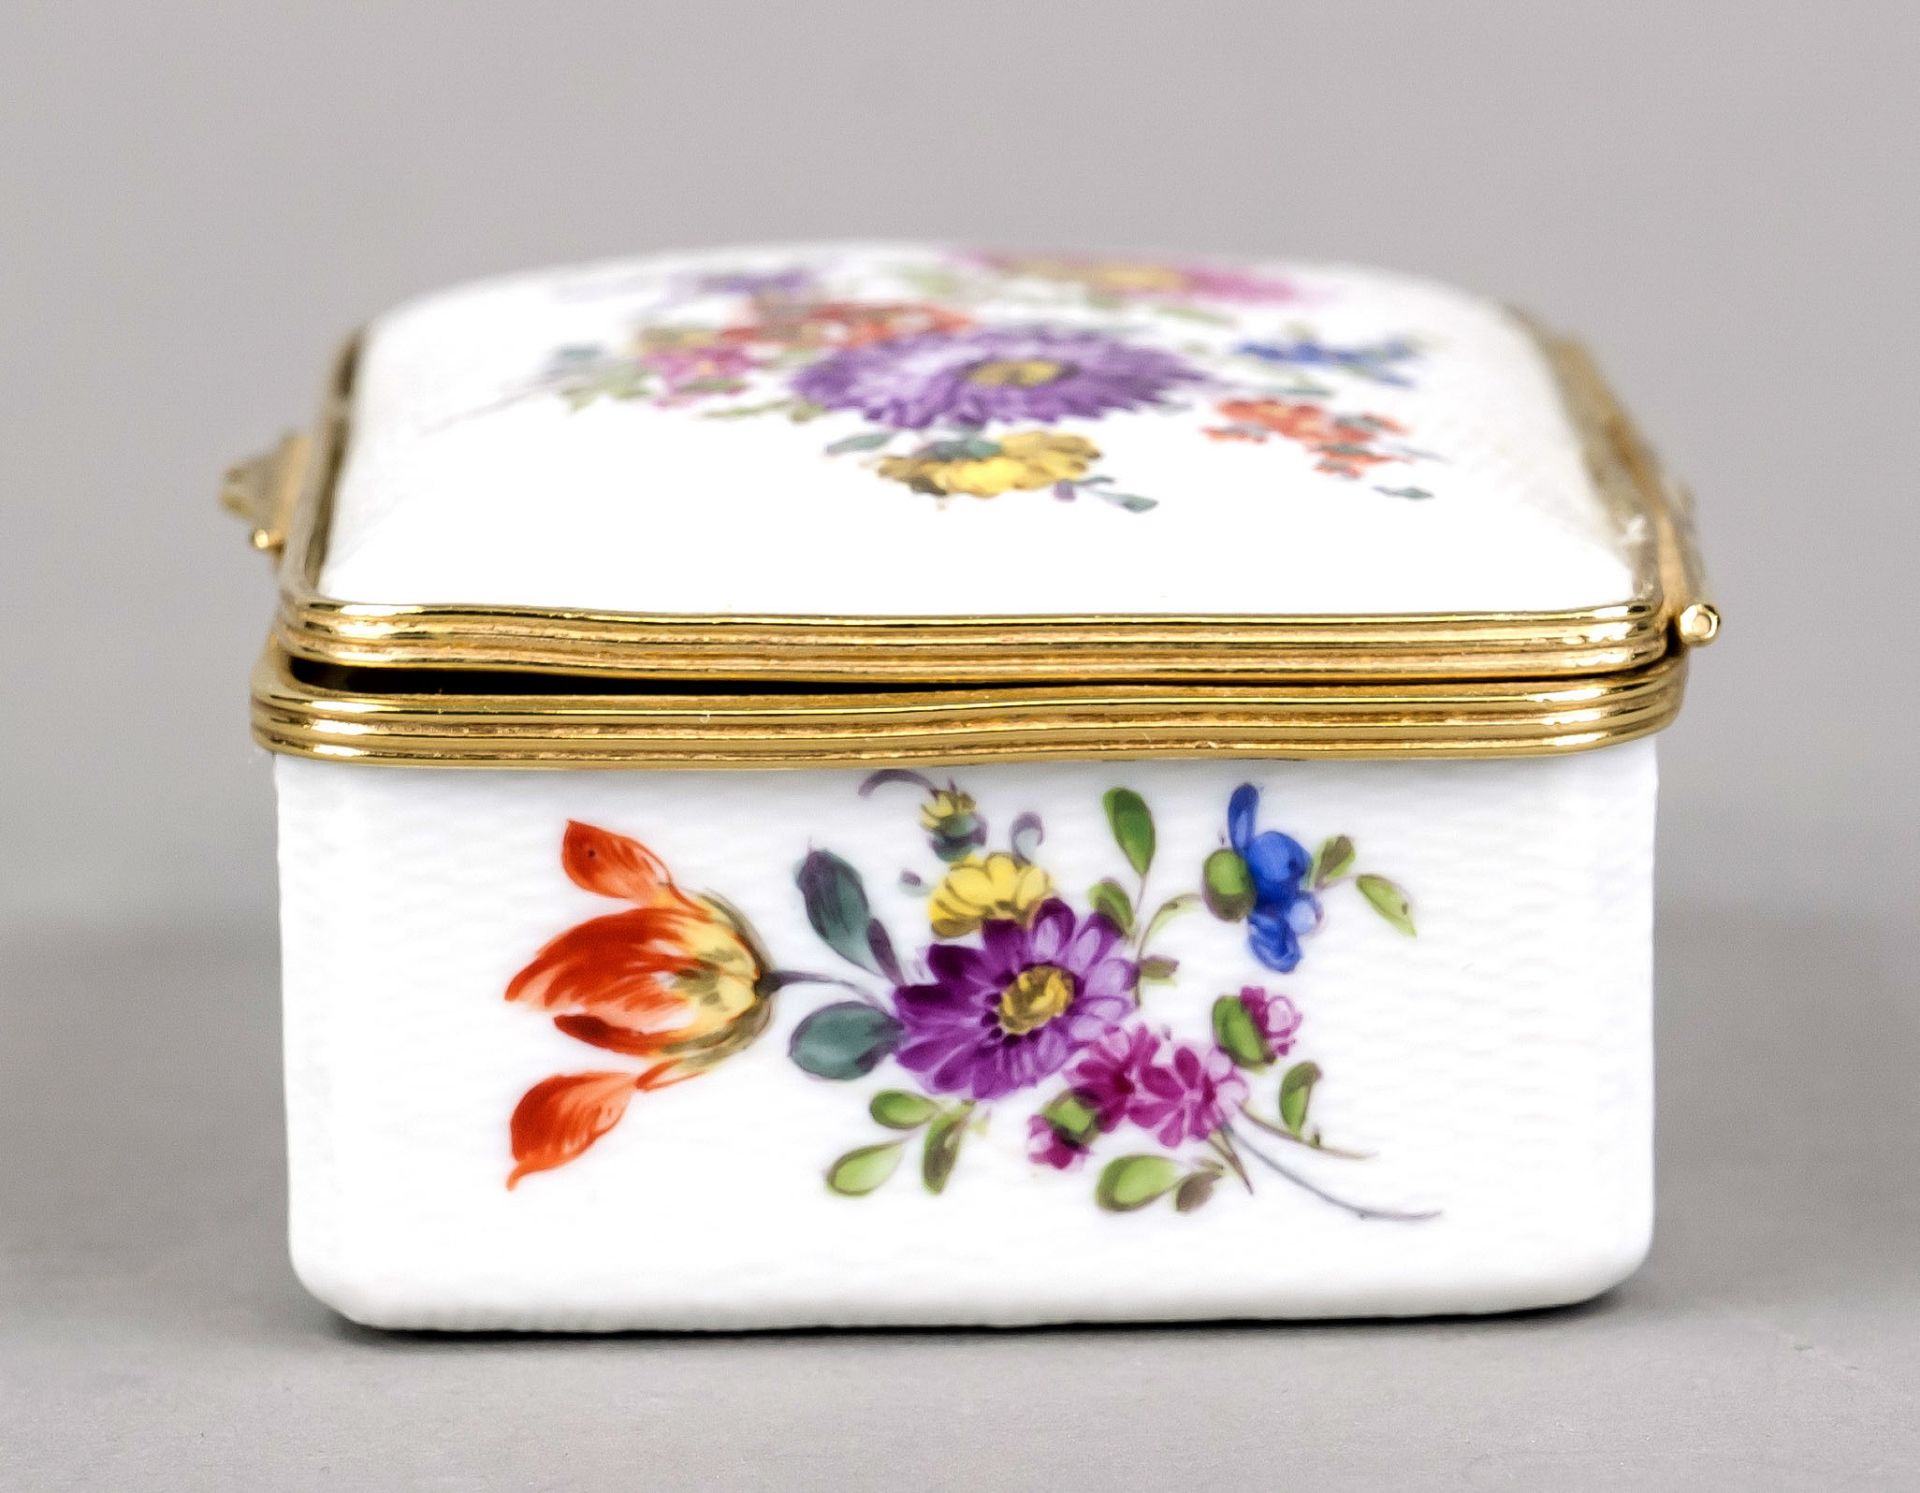 Rectangular lidded box, w. Meissen, 18th century, outer wall in subtle basket relief, polychrome - Image 4 of 5